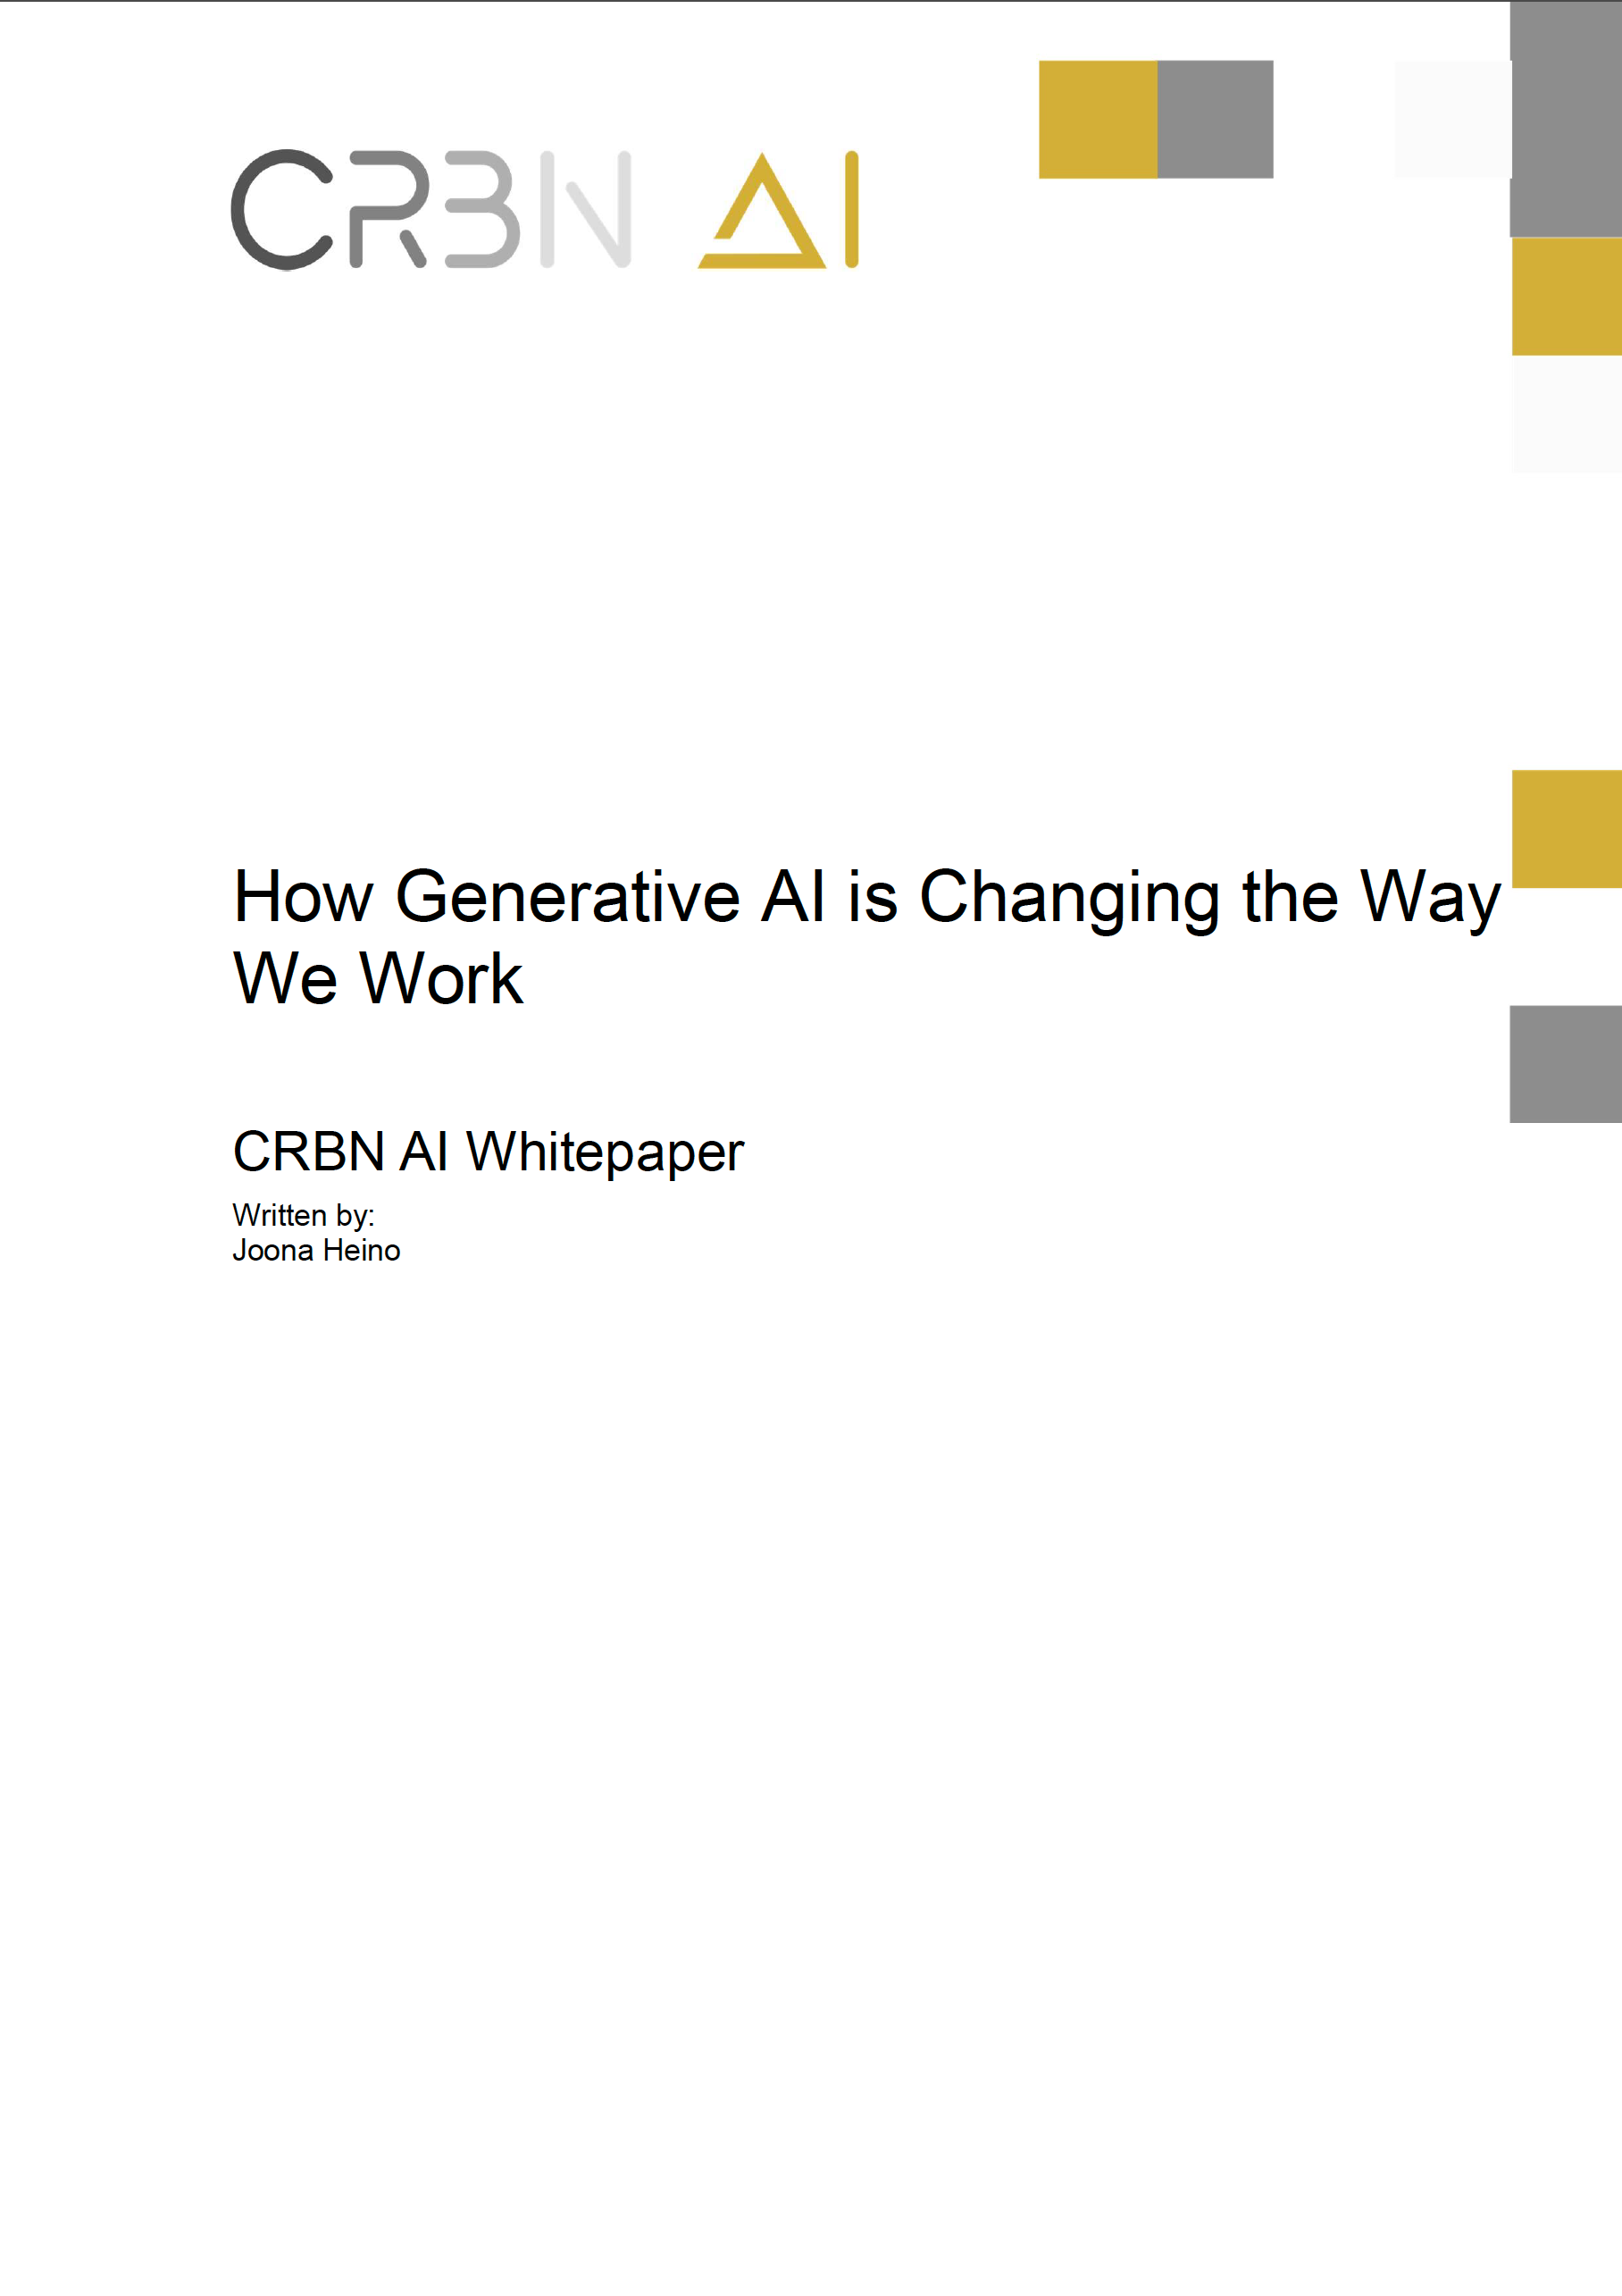 How Generative AI is Changing the Way We Work